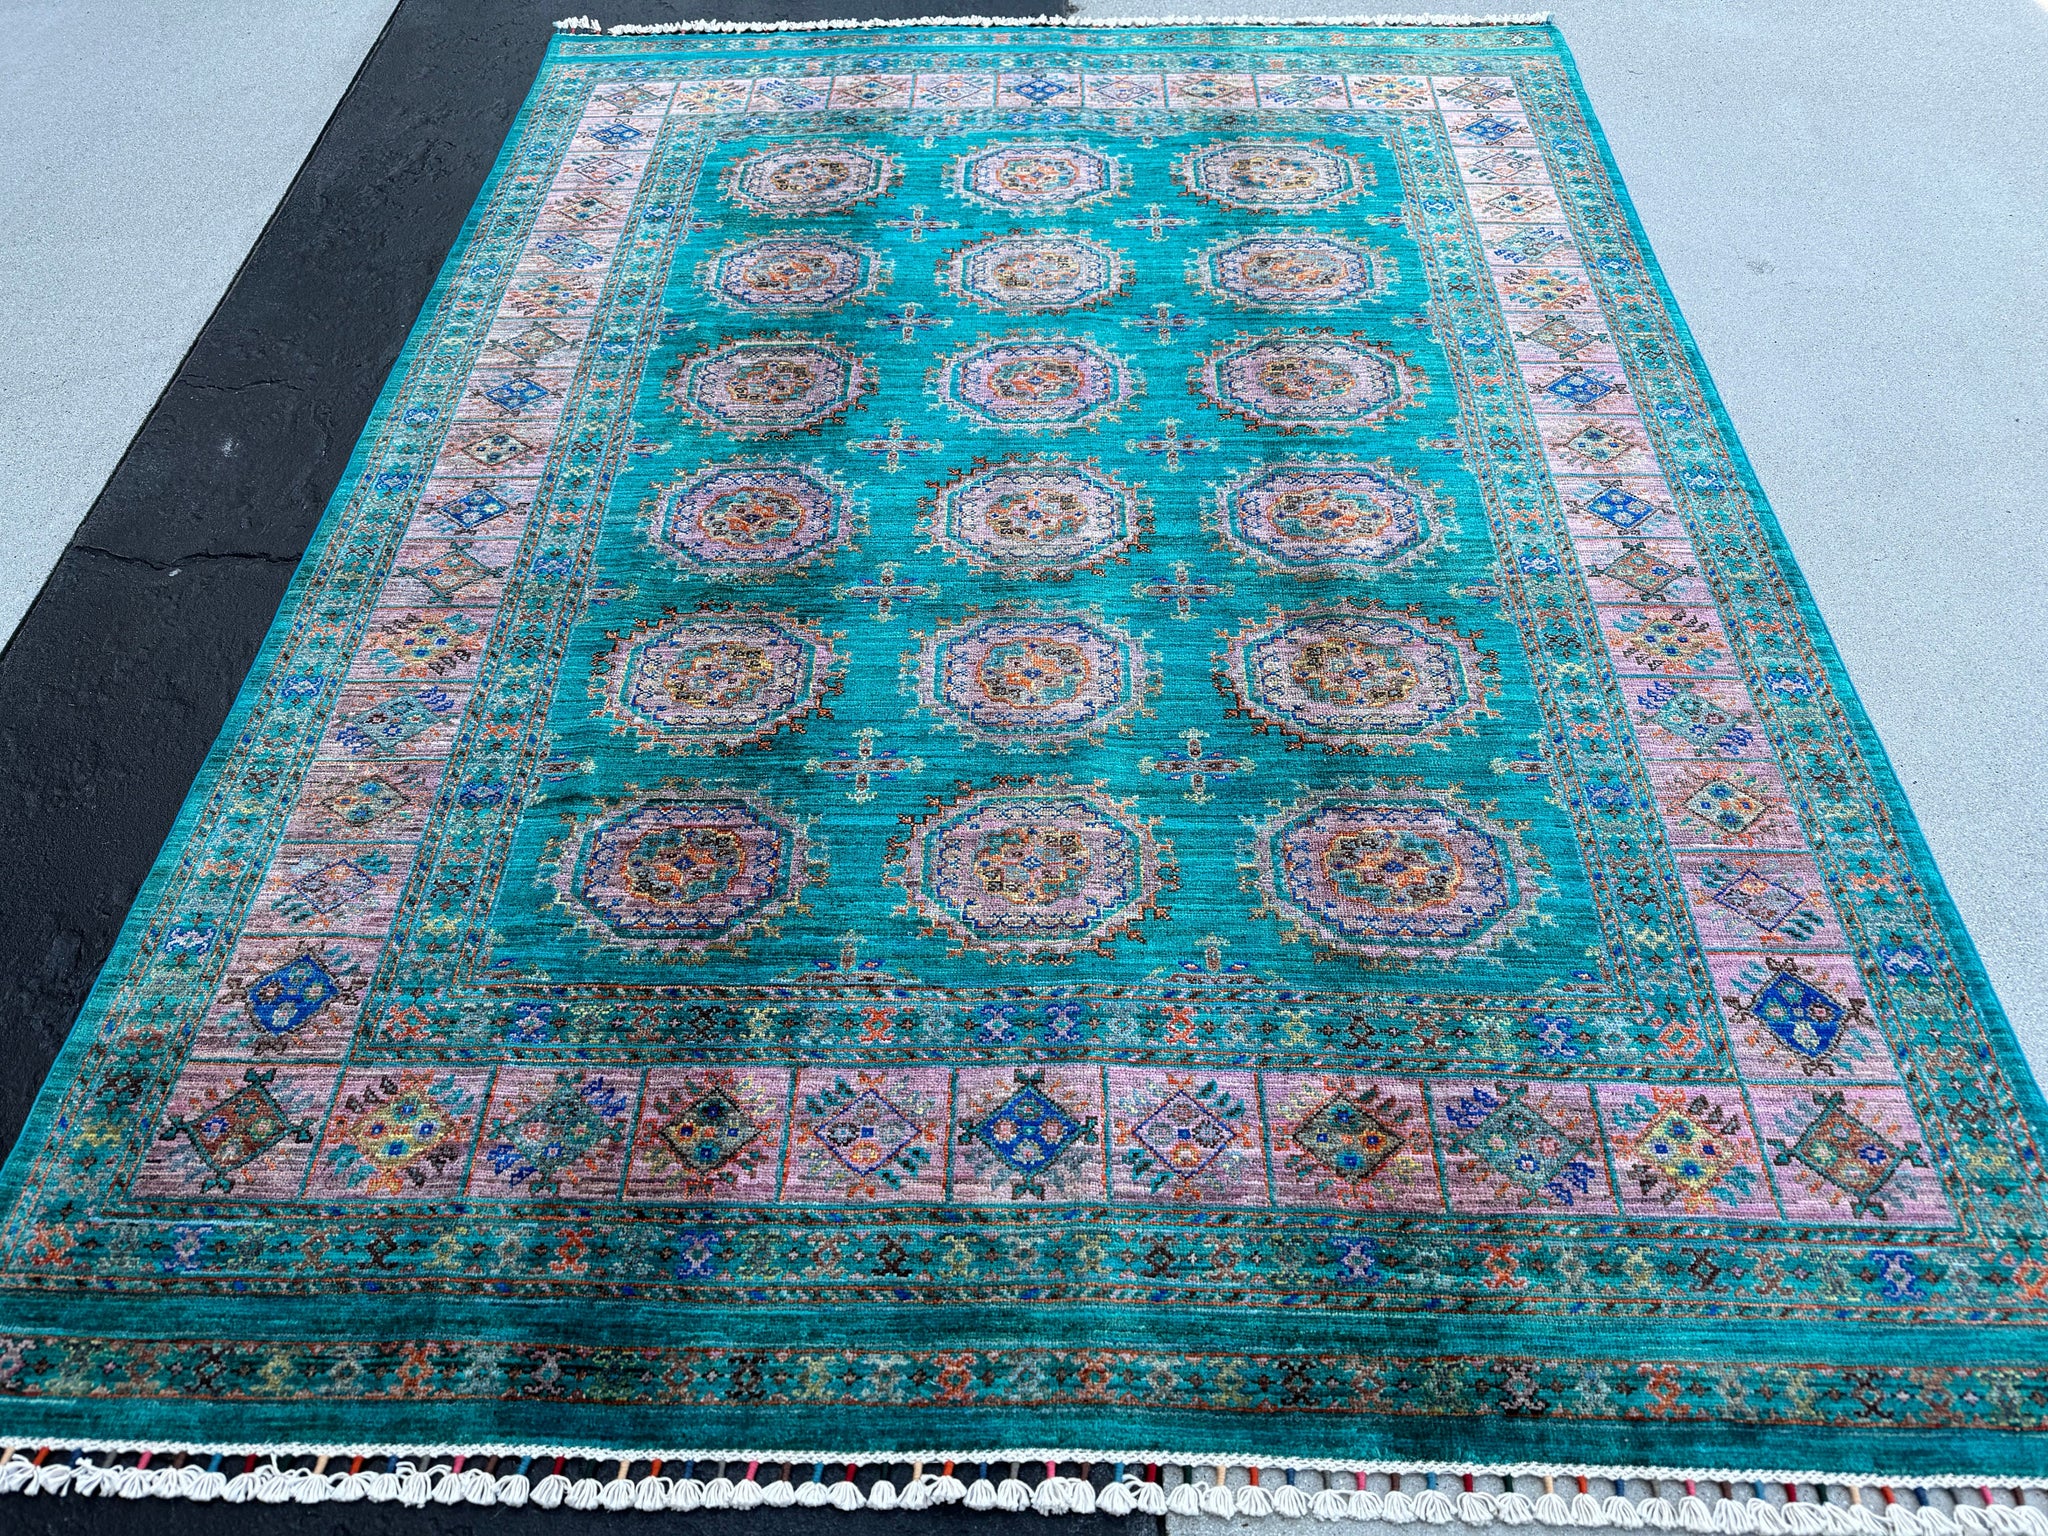 6x8 (180x245) Hand Knotted Afghan Rug | Teal Rust Orange Lavender Mint Green Dusty Rose Salmon Pink Ivory Indigo | Wool Hand Knotted